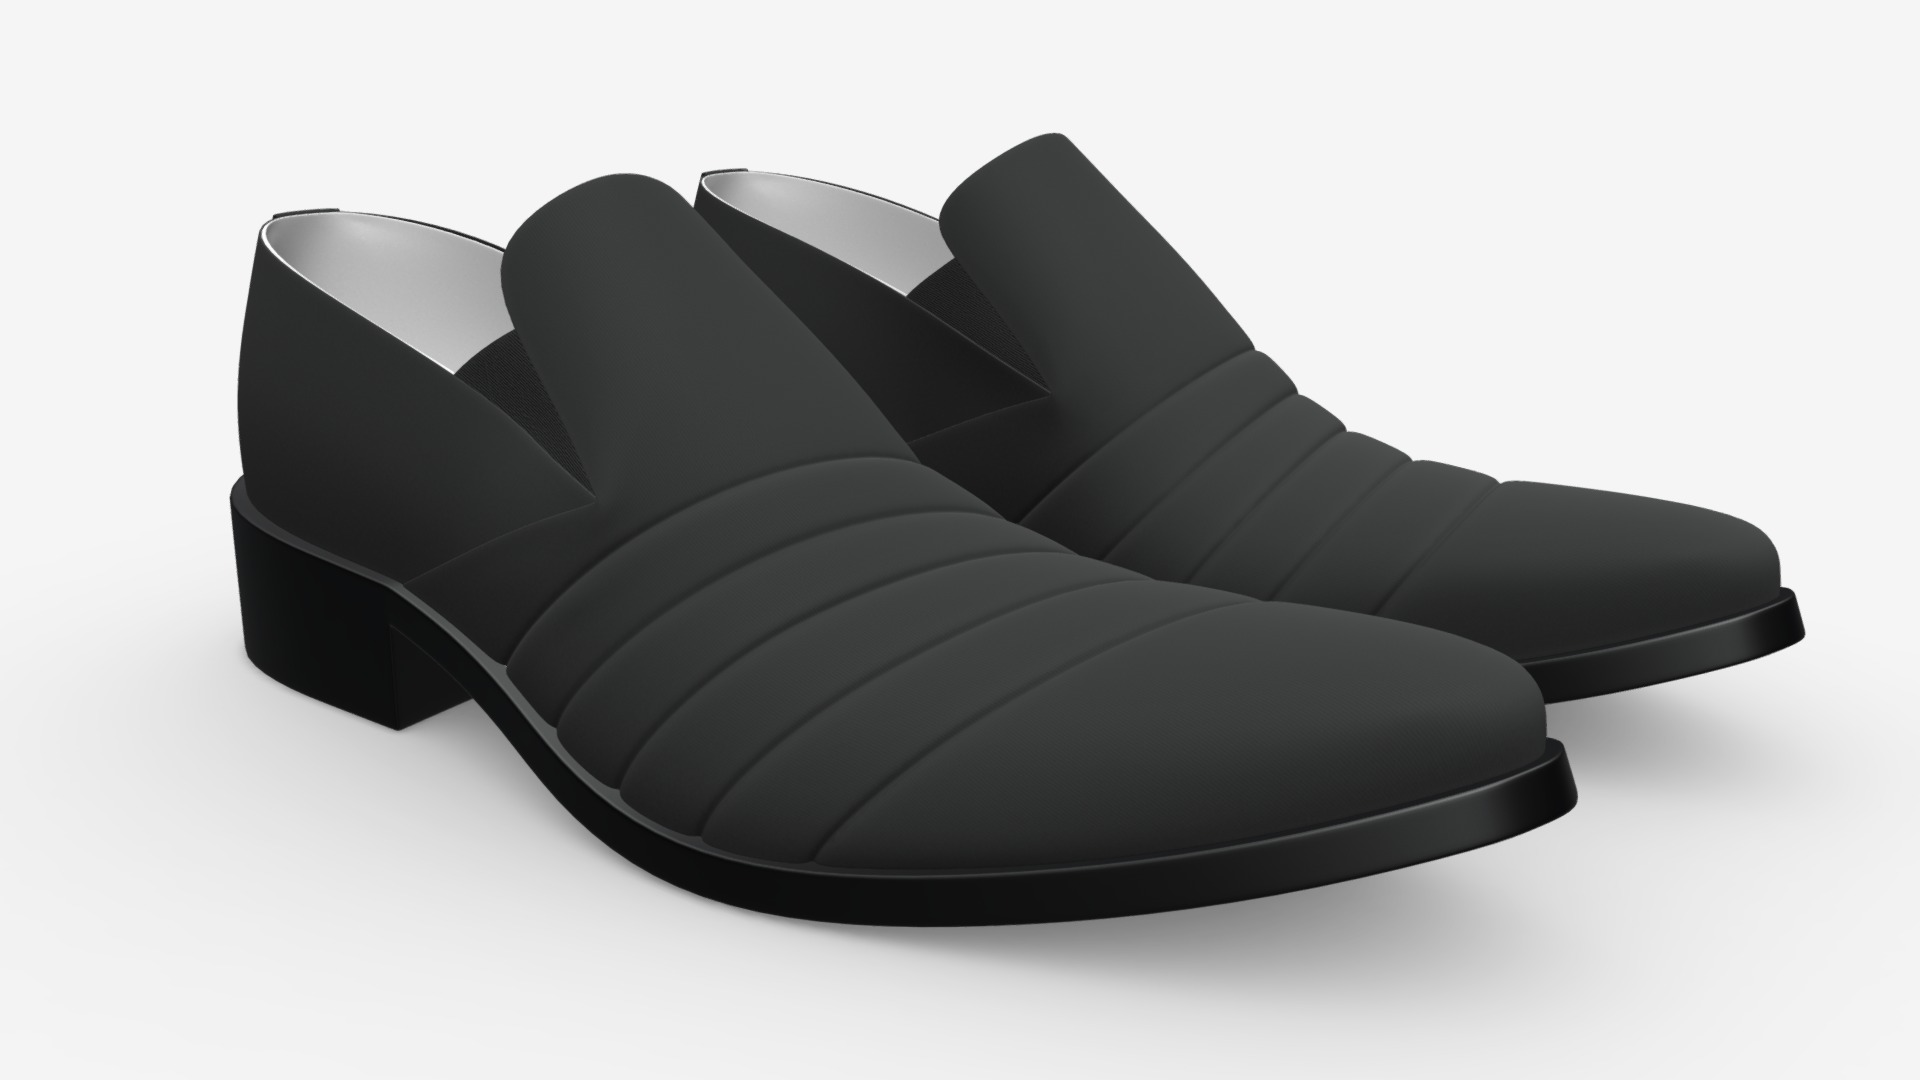 3D model Mens classic shoes 06 - This is a 3D model of the Mens classic shoes 06. The 3D model is about a black and white shoe.